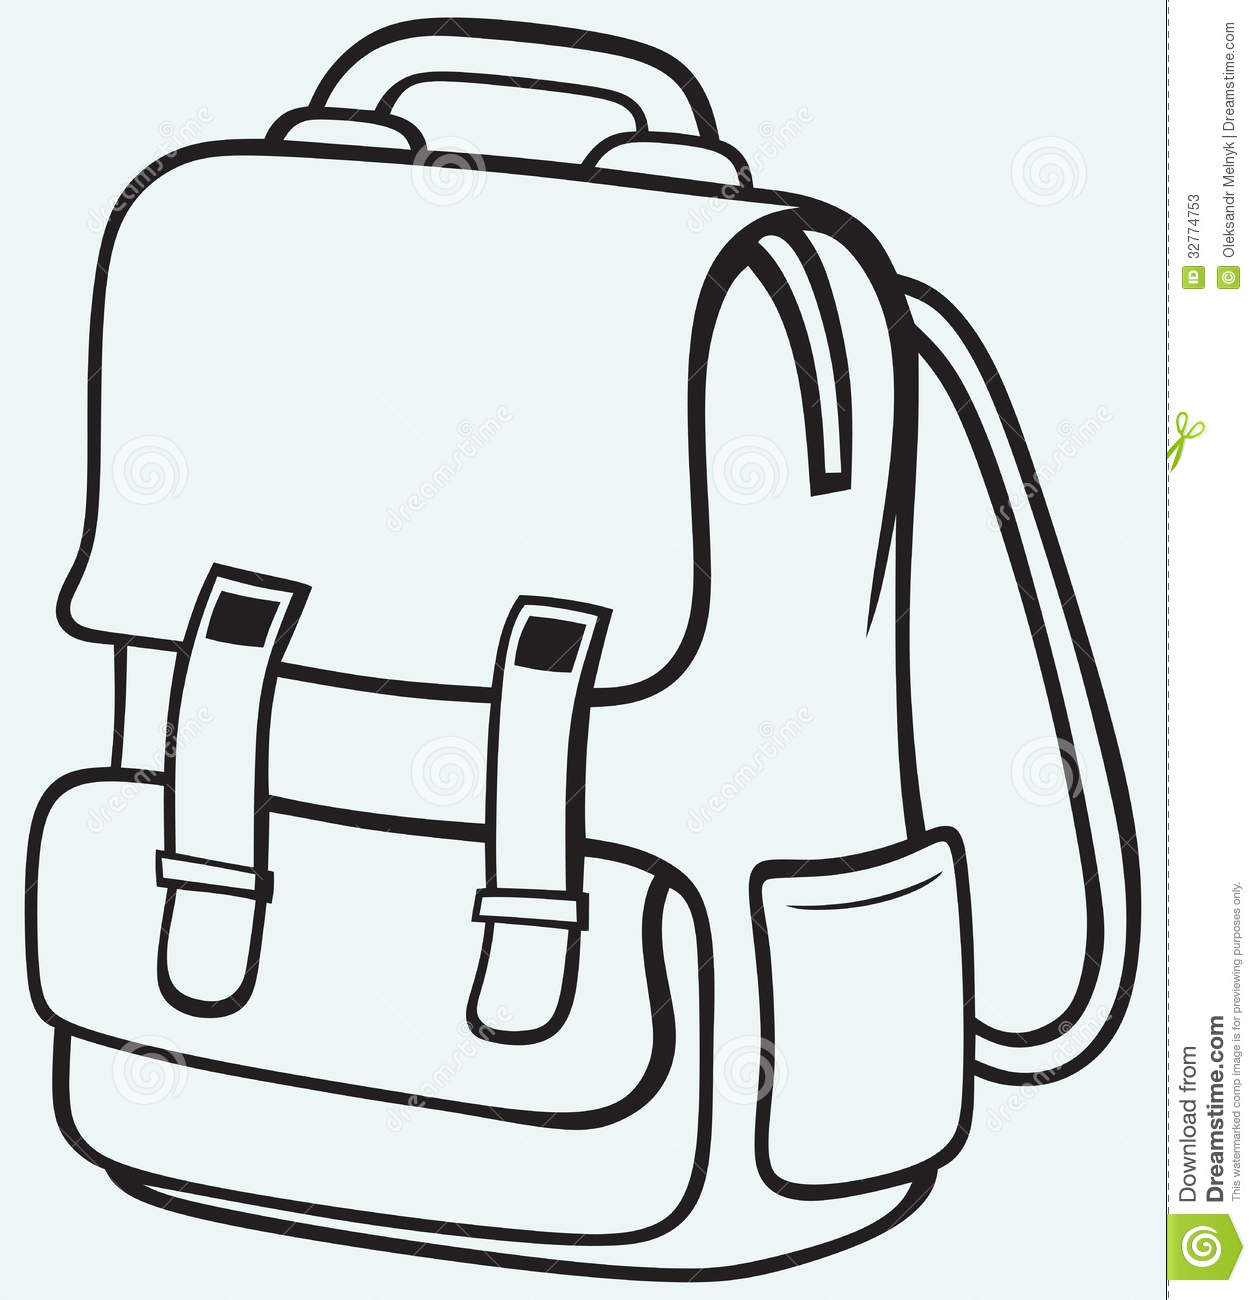 School Bag Clipart Black And White.